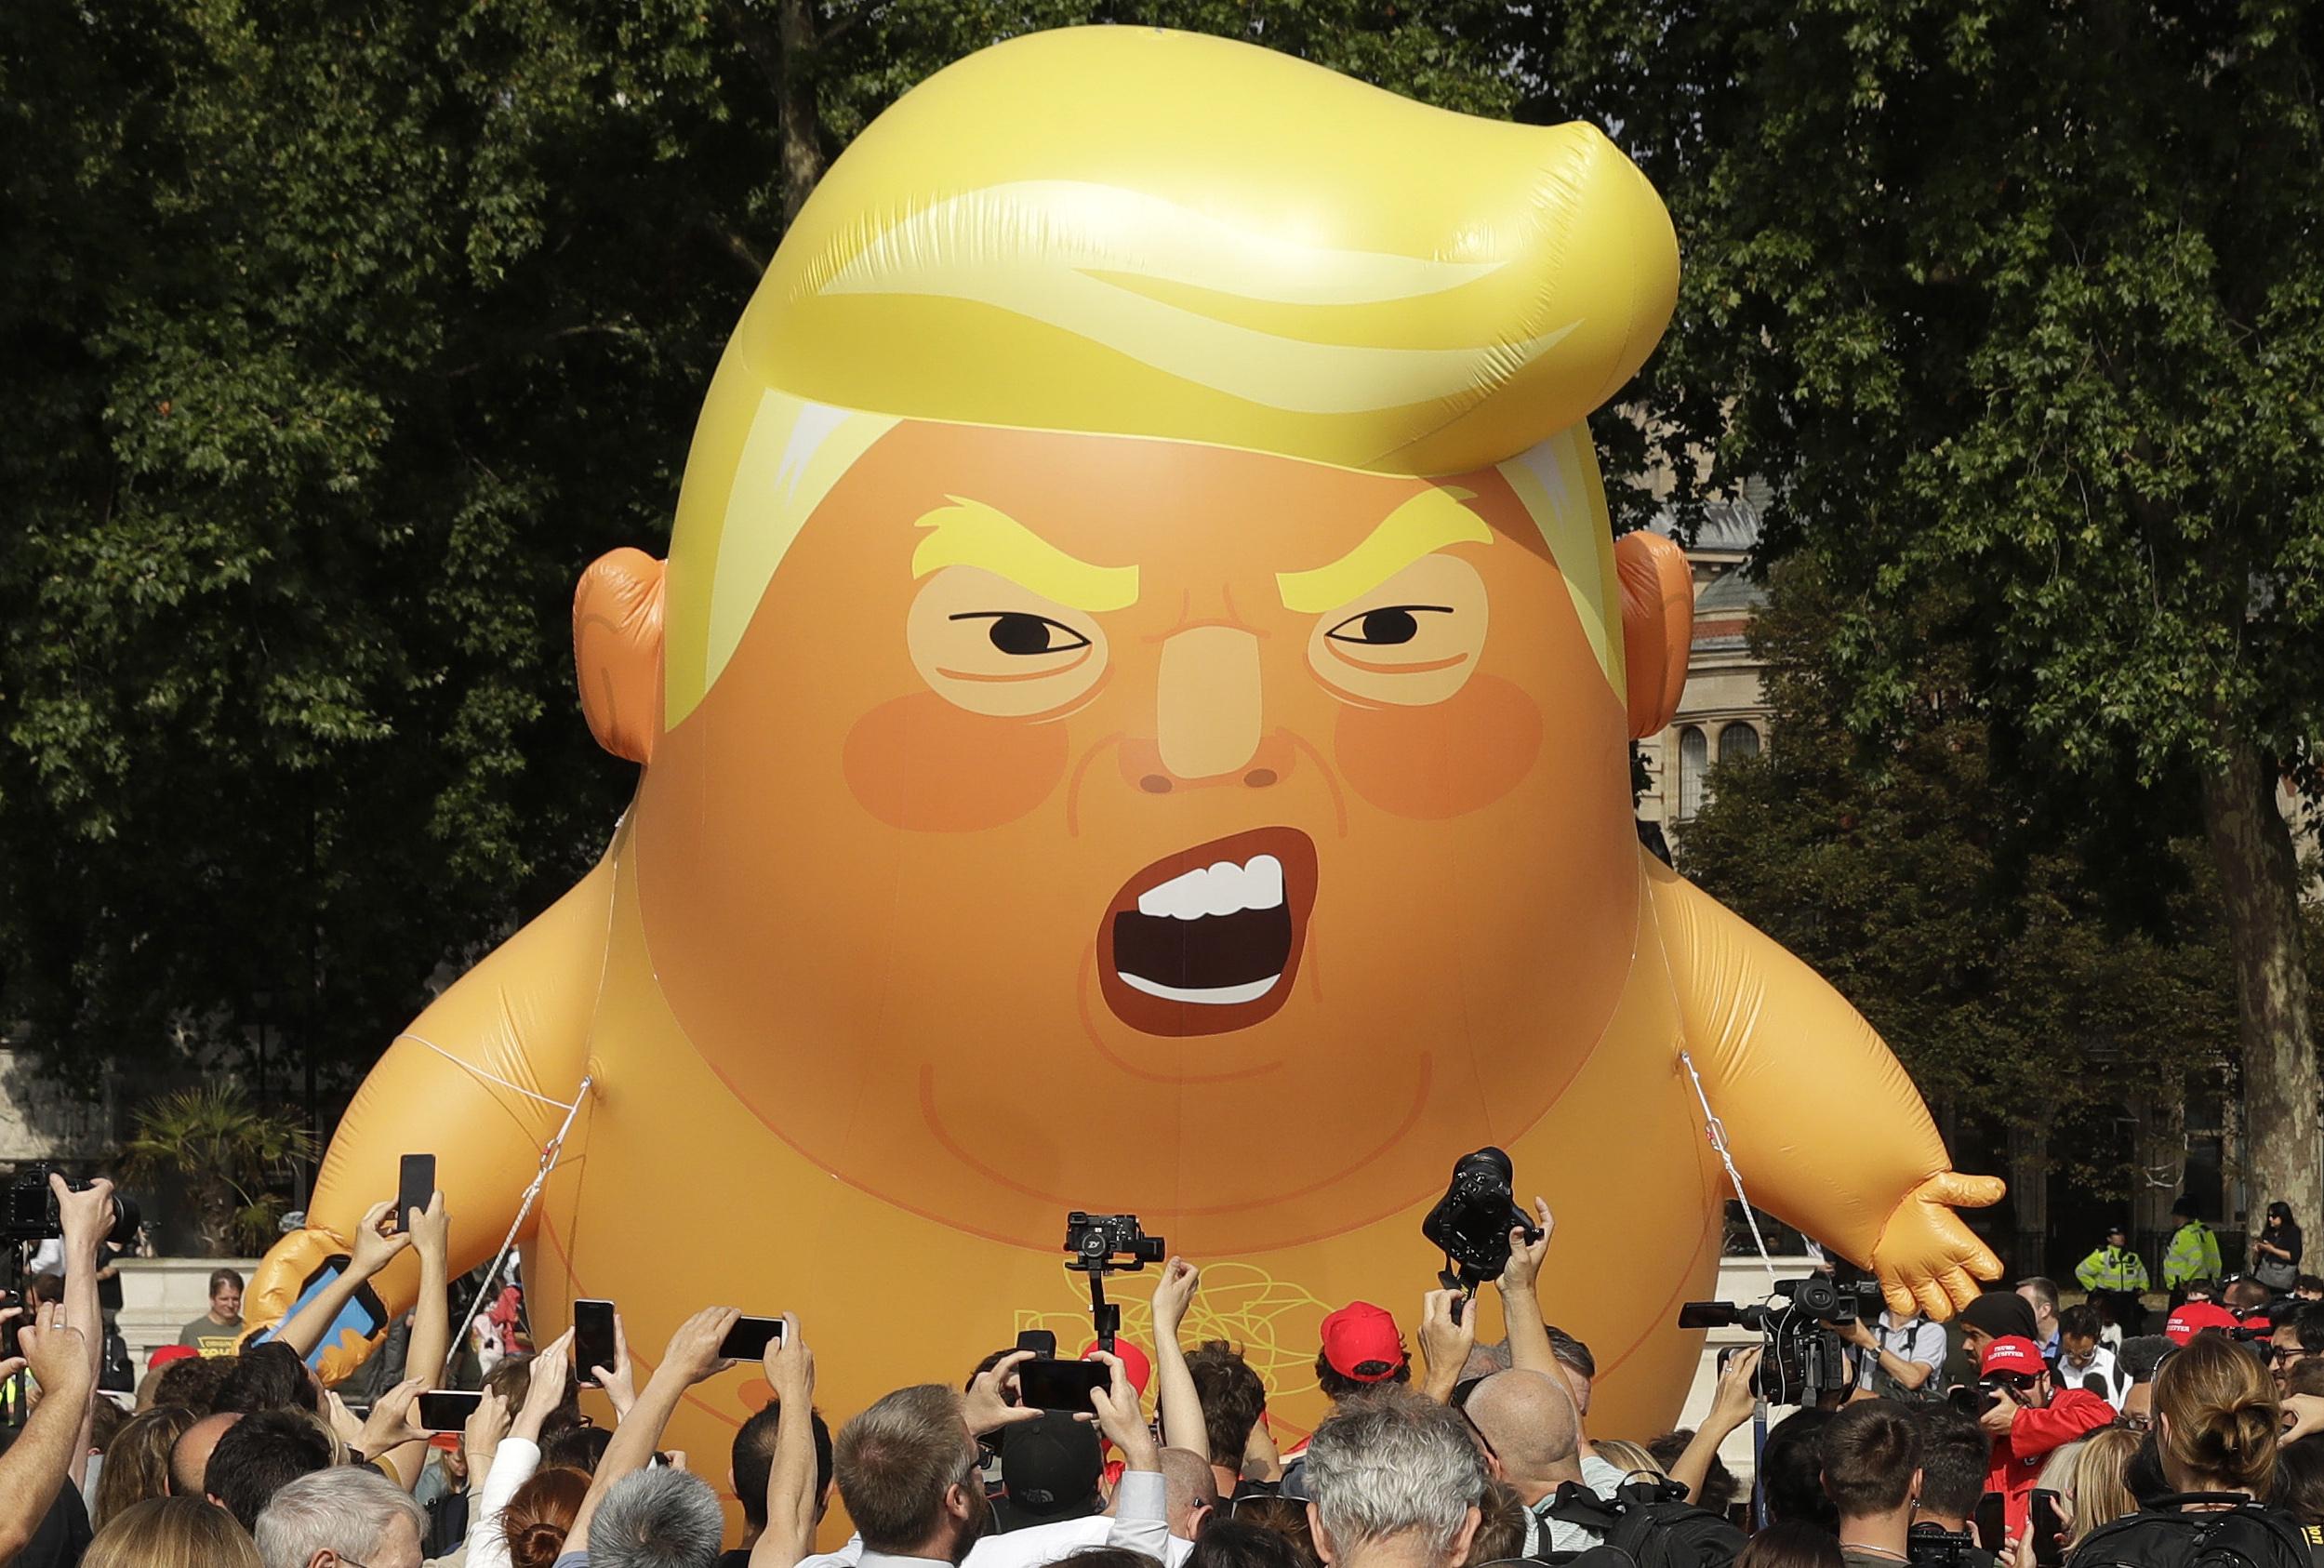 Download U.K. demonstrators march against Trump, mock with giant balloon | The Spokesman-Review